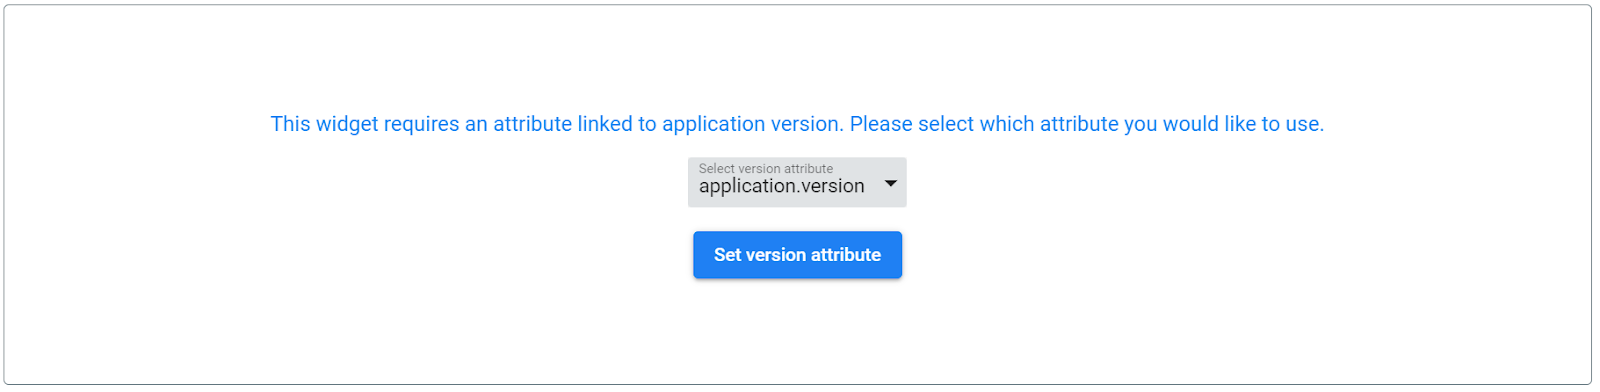 Shows how to change the attribute for application version.